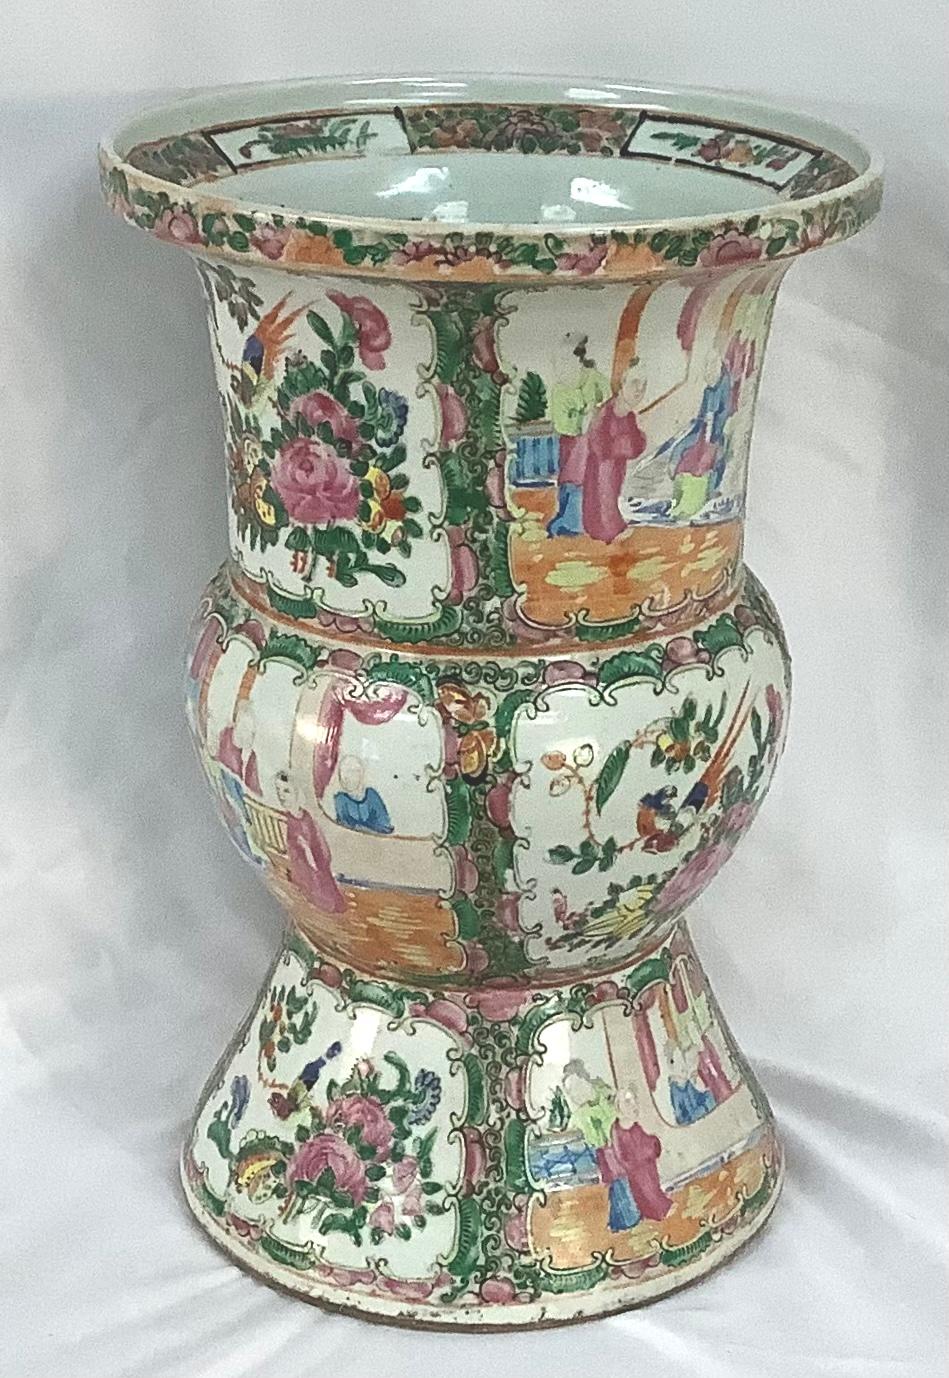 Antique 19th century rose medallion vase with a bulbous center section and a smaller flared out section on the bottom and a larger flared out section on the top The colors are vivid. The decoration is superb.